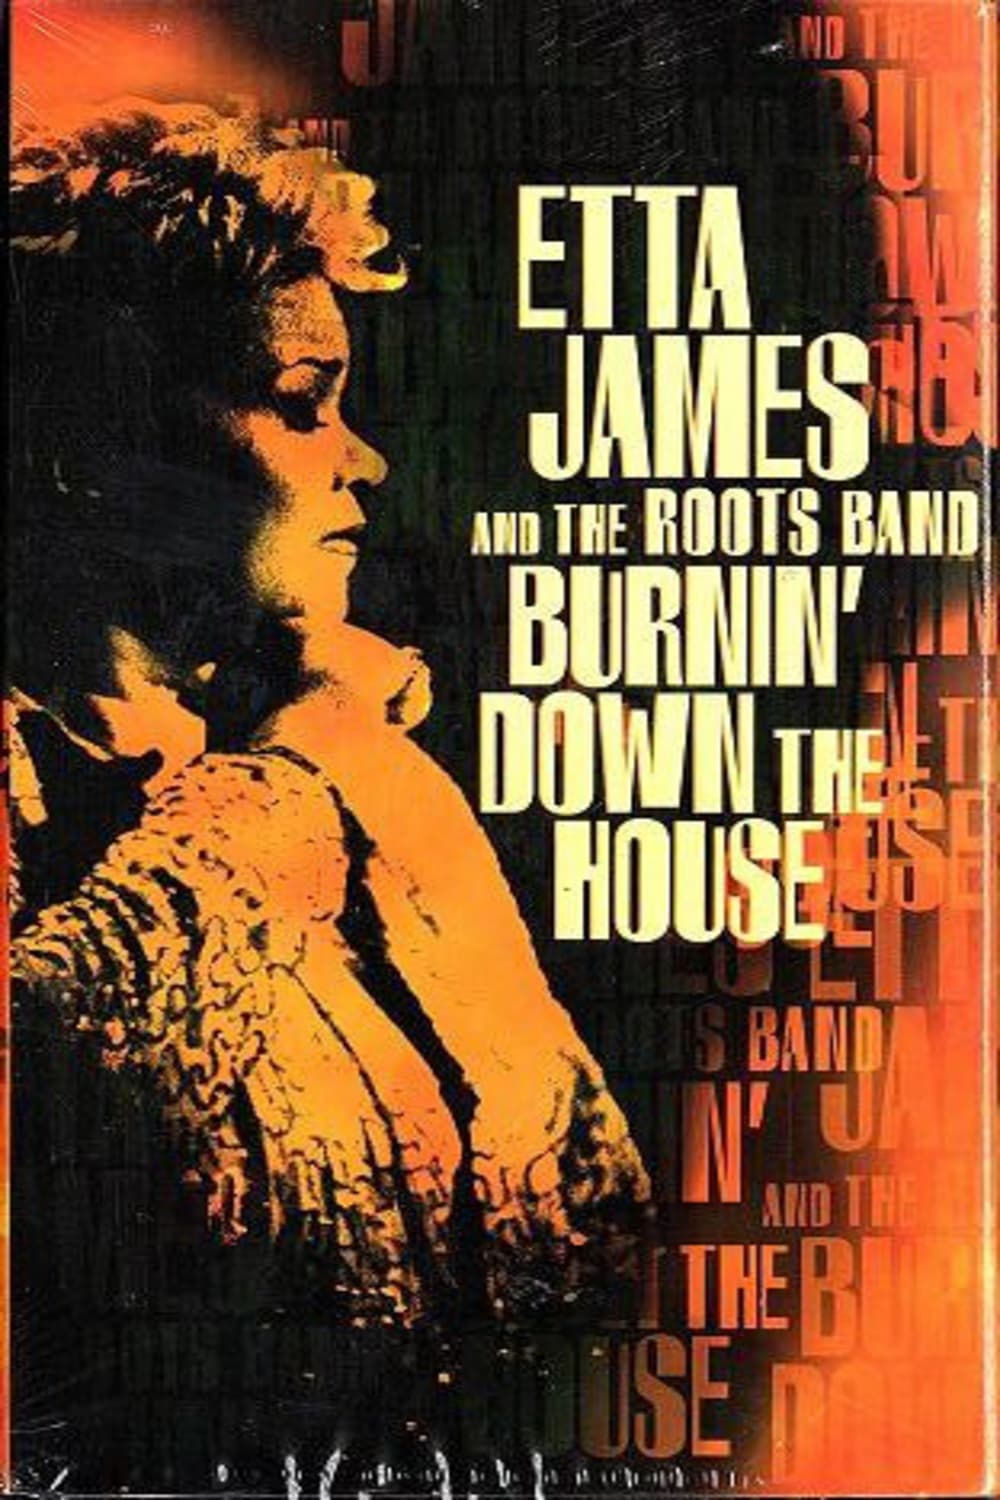 Etta James And The Roots Band: Burnin' Down The House